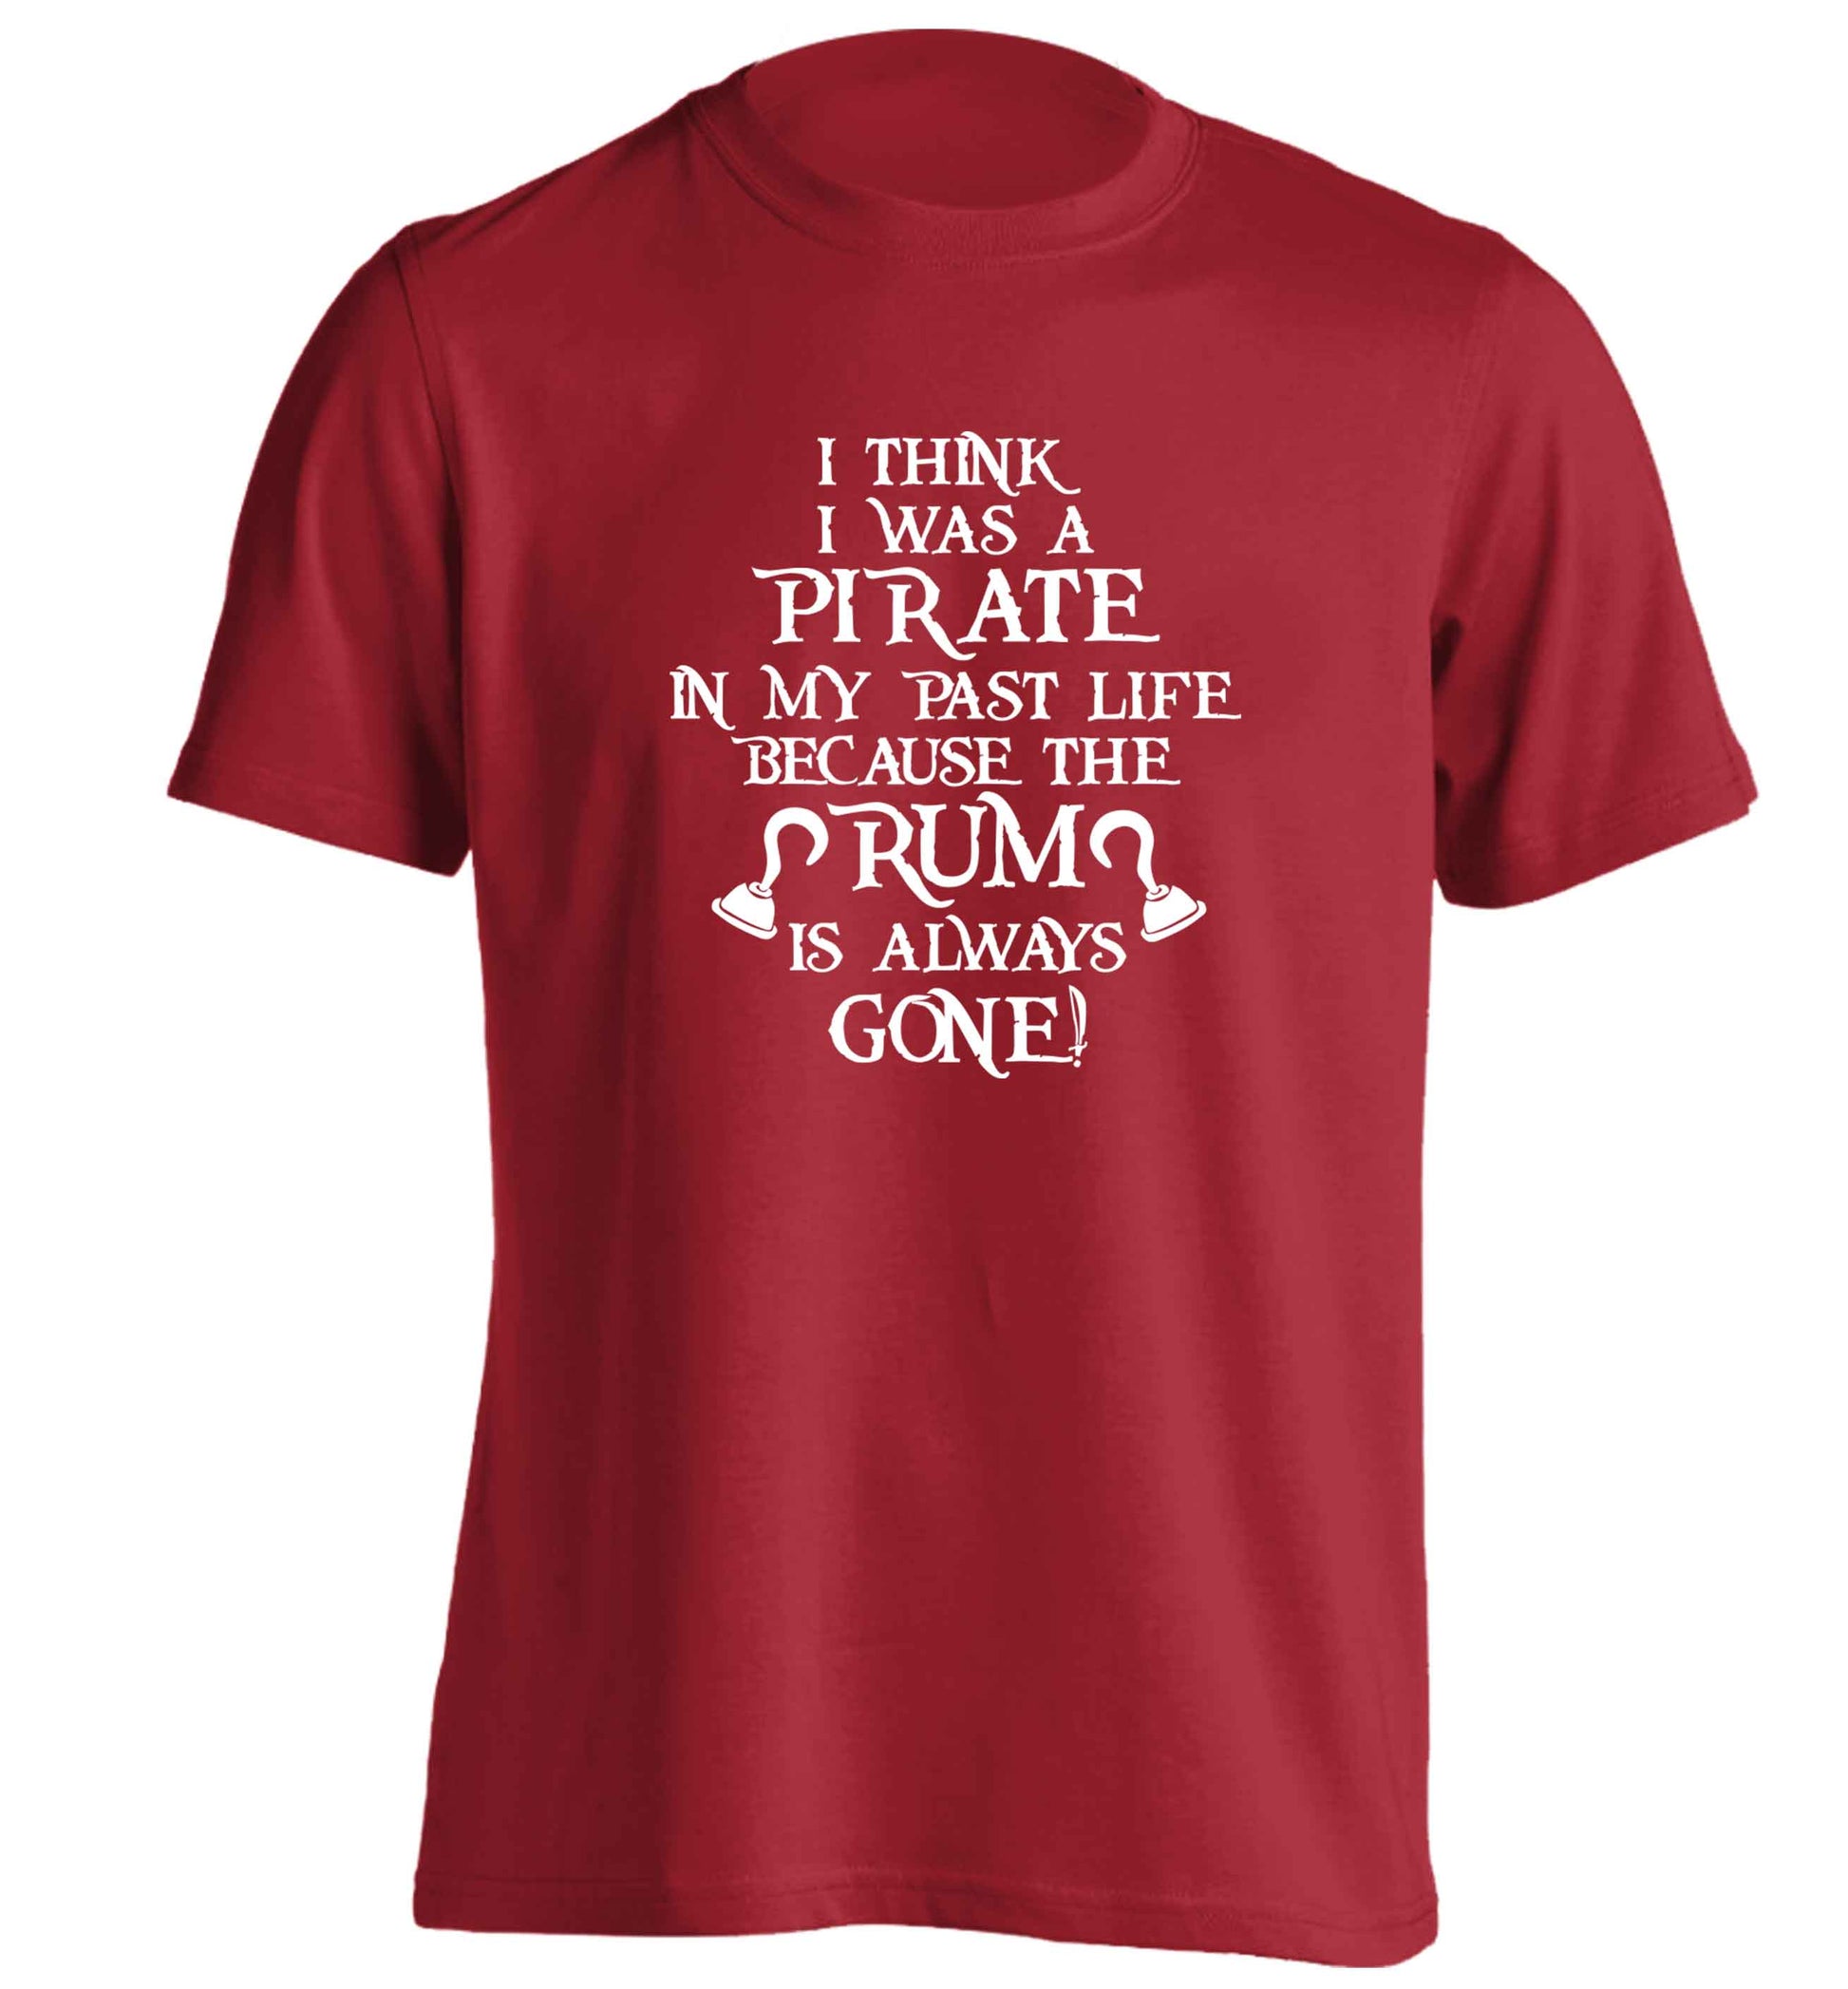 I think I was a pirate in my past life the rum is always gone adults unisex red Tshirt 2XL